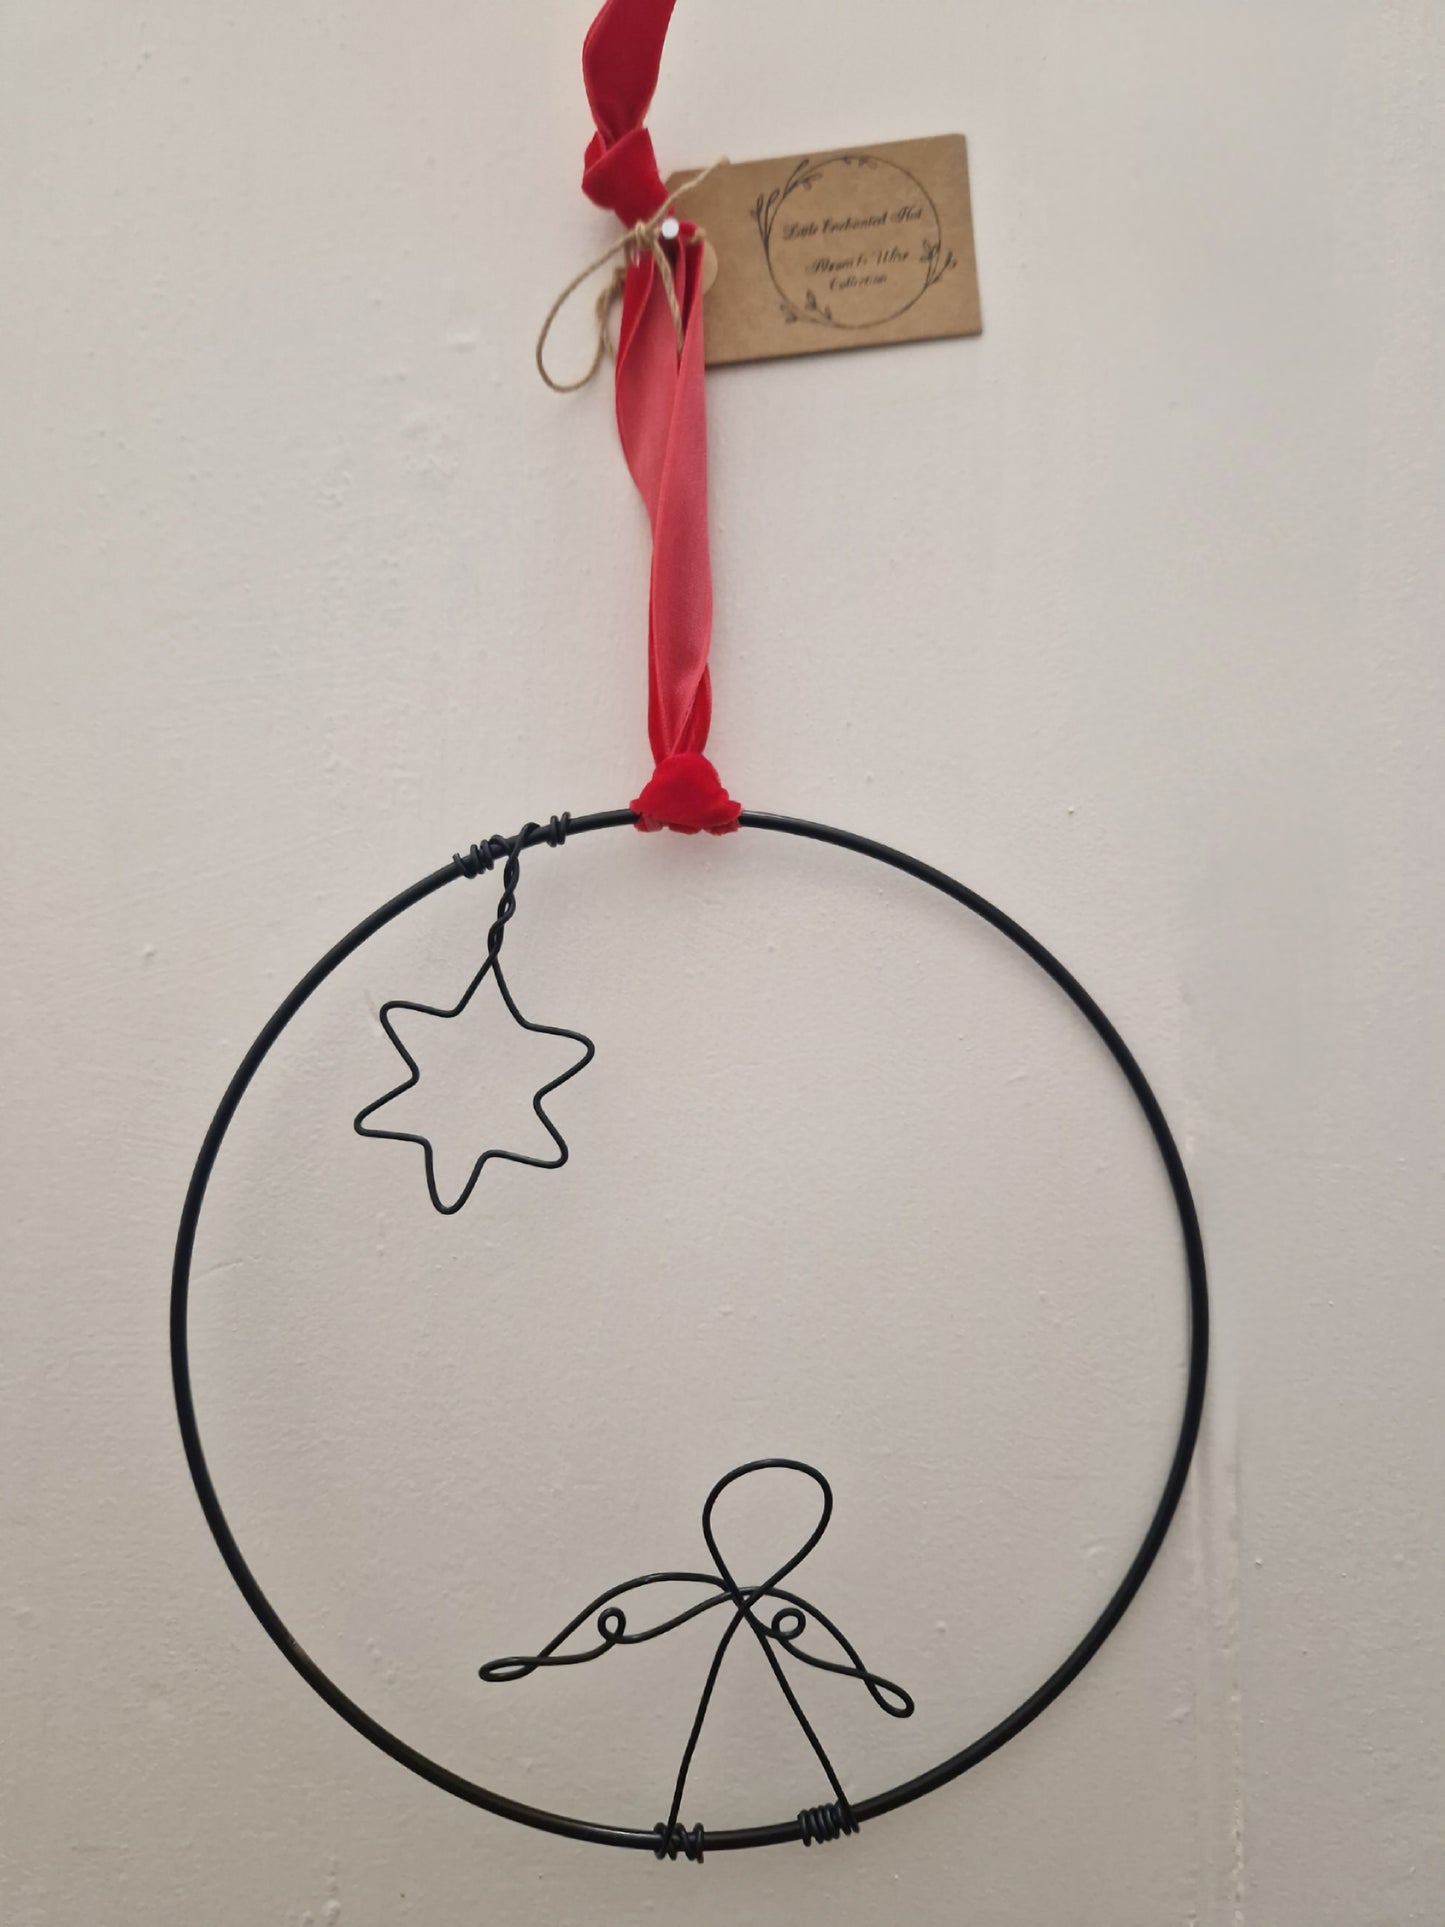 Handcrafted wire Christmas decor hoop.